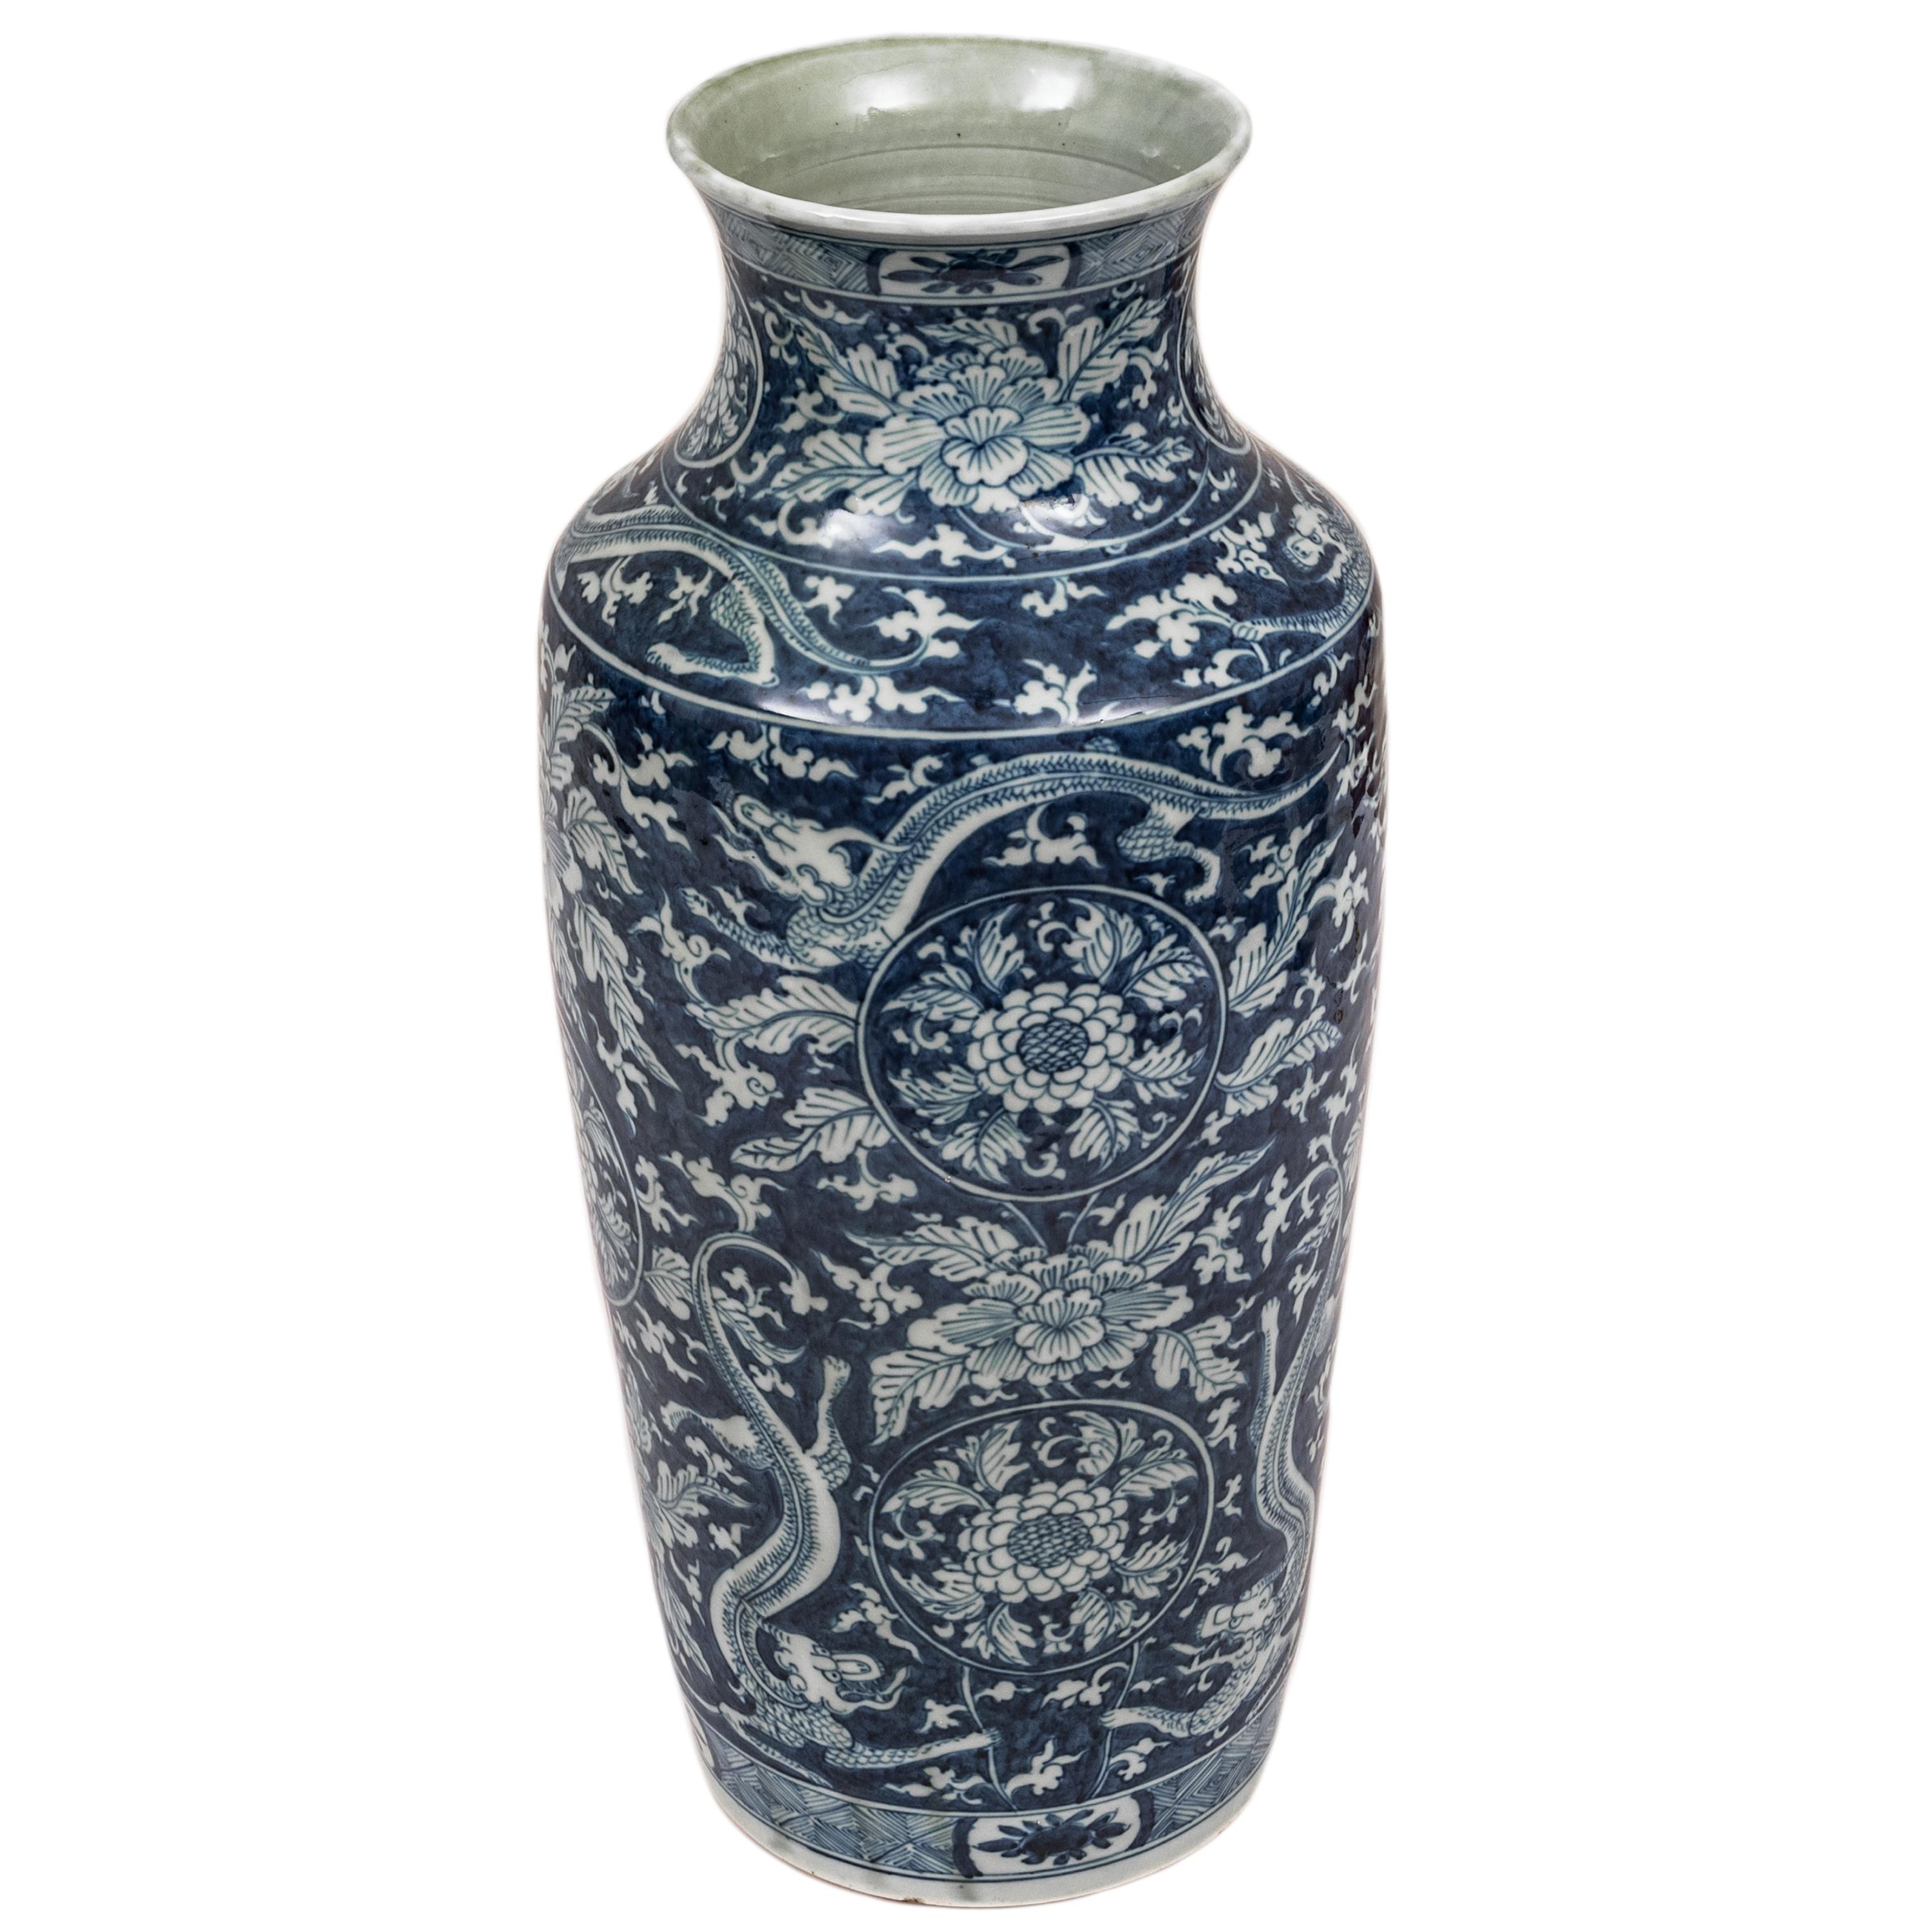 Antique Blue White Chinese Porcelain Qing Dynasty Kangxi Period Dragon Vase 1680 For Sale 5